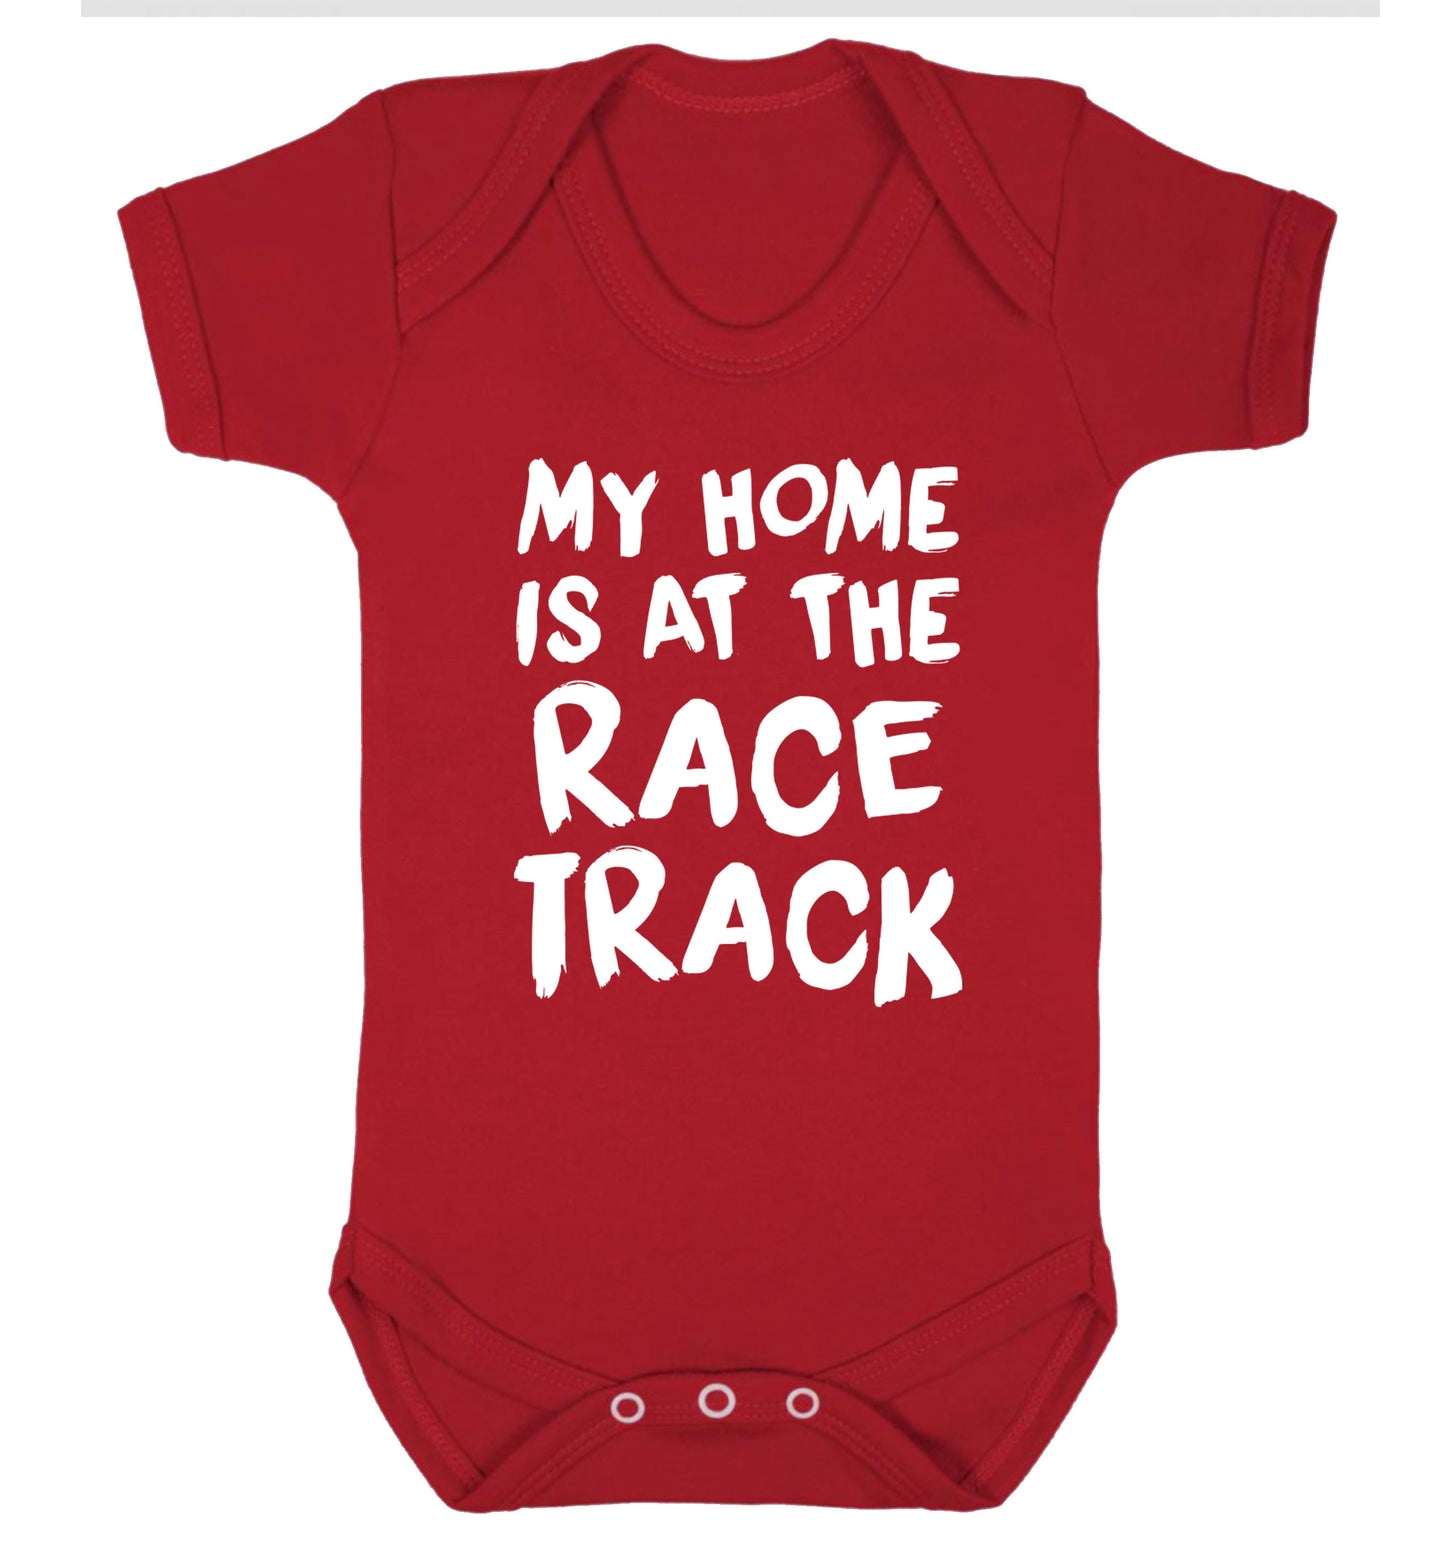 My home is at the race track Baby Vest red 18-24 months